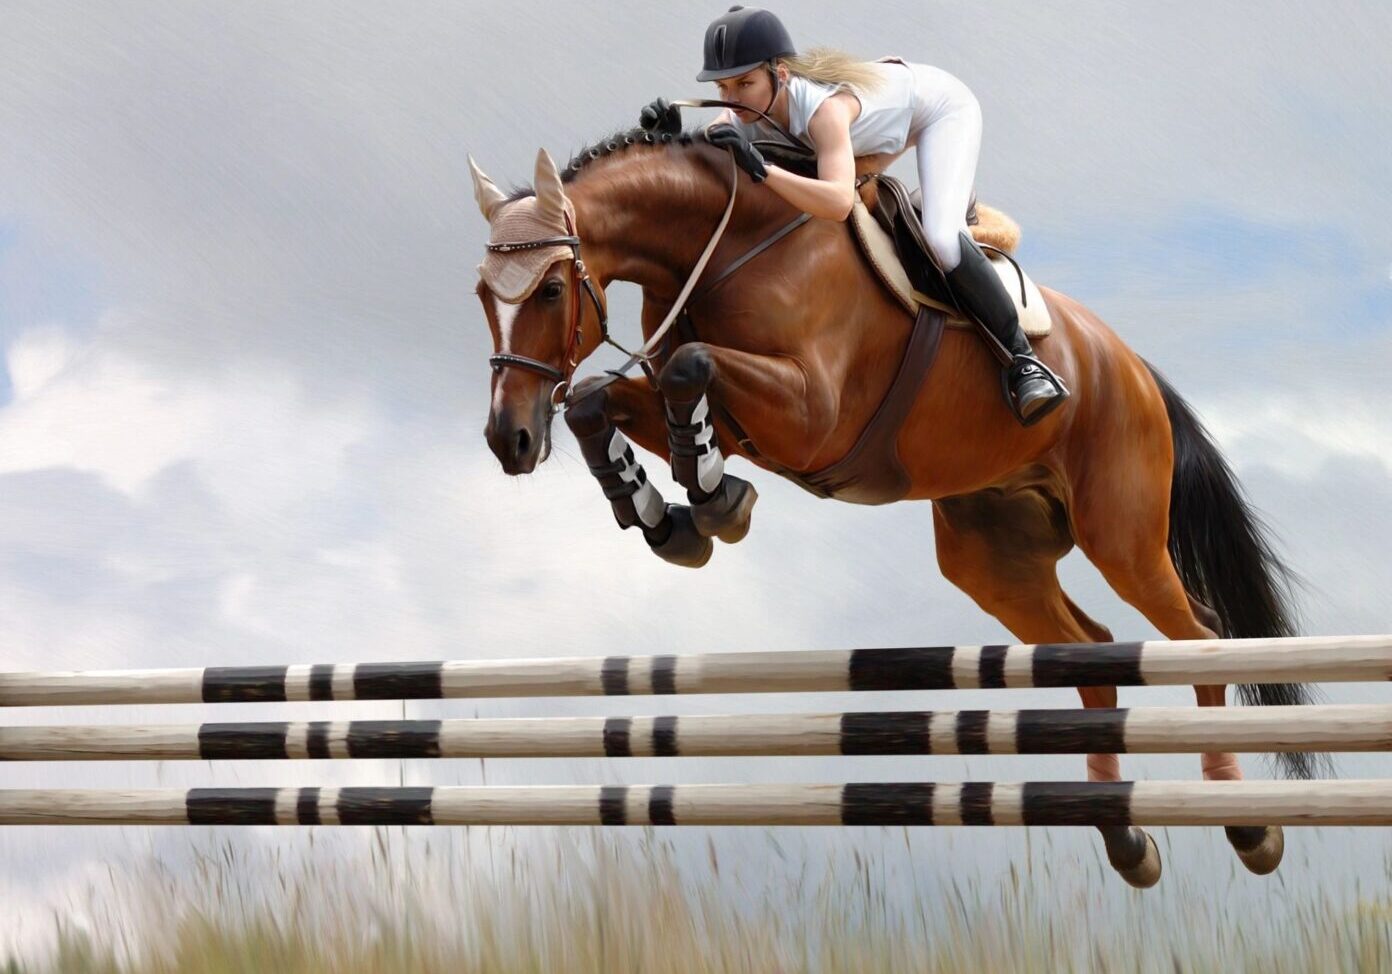 A person jumping over an obstacle on a horse.